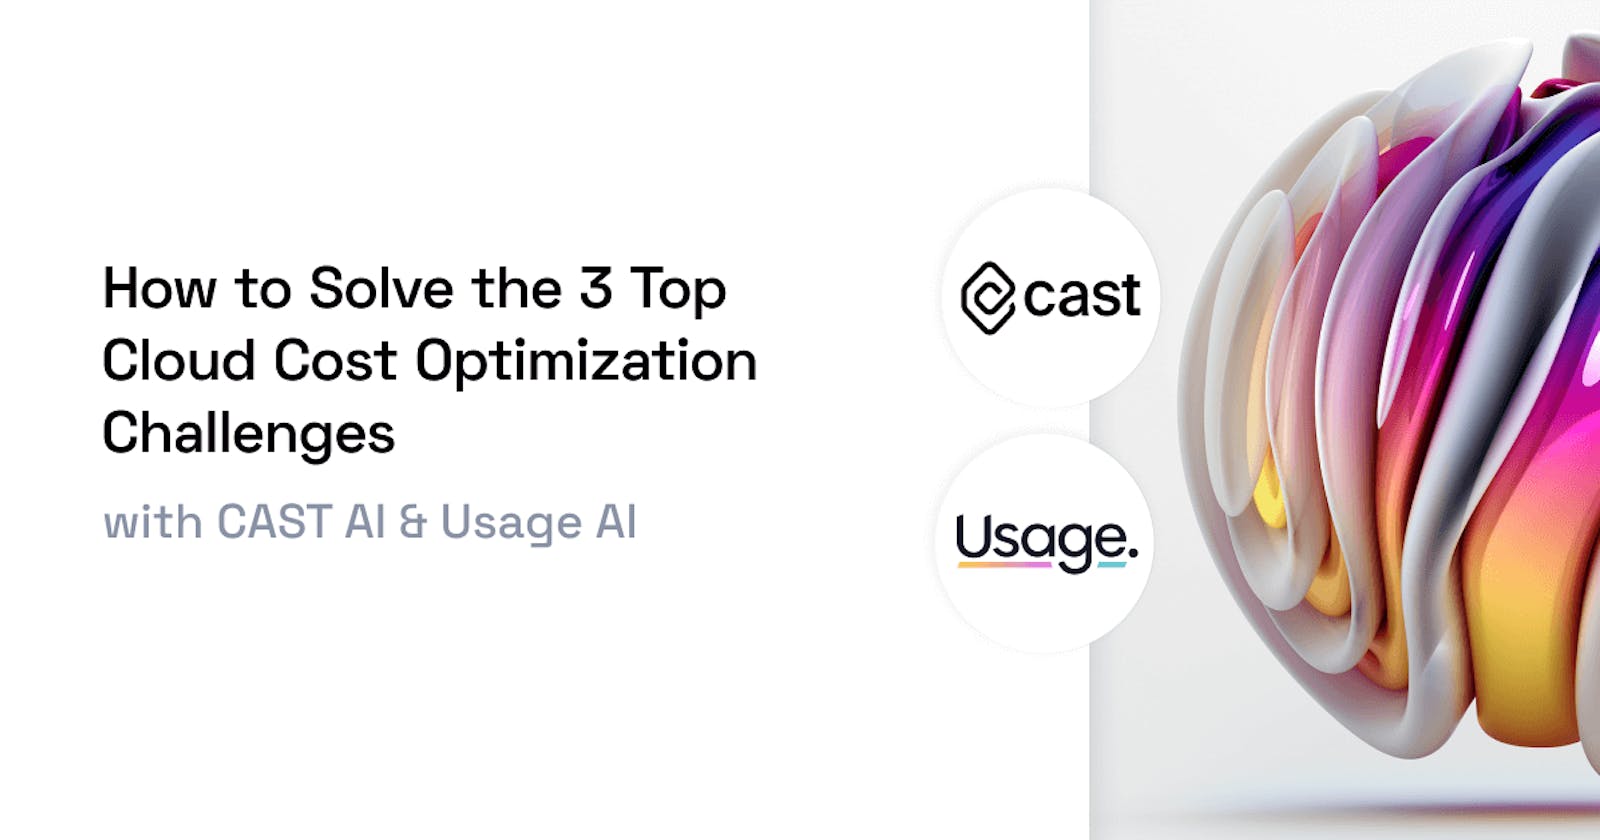 How to Solve the 3 Top Cloud Cost Optimization Challenges with CAST AI and Usage AI